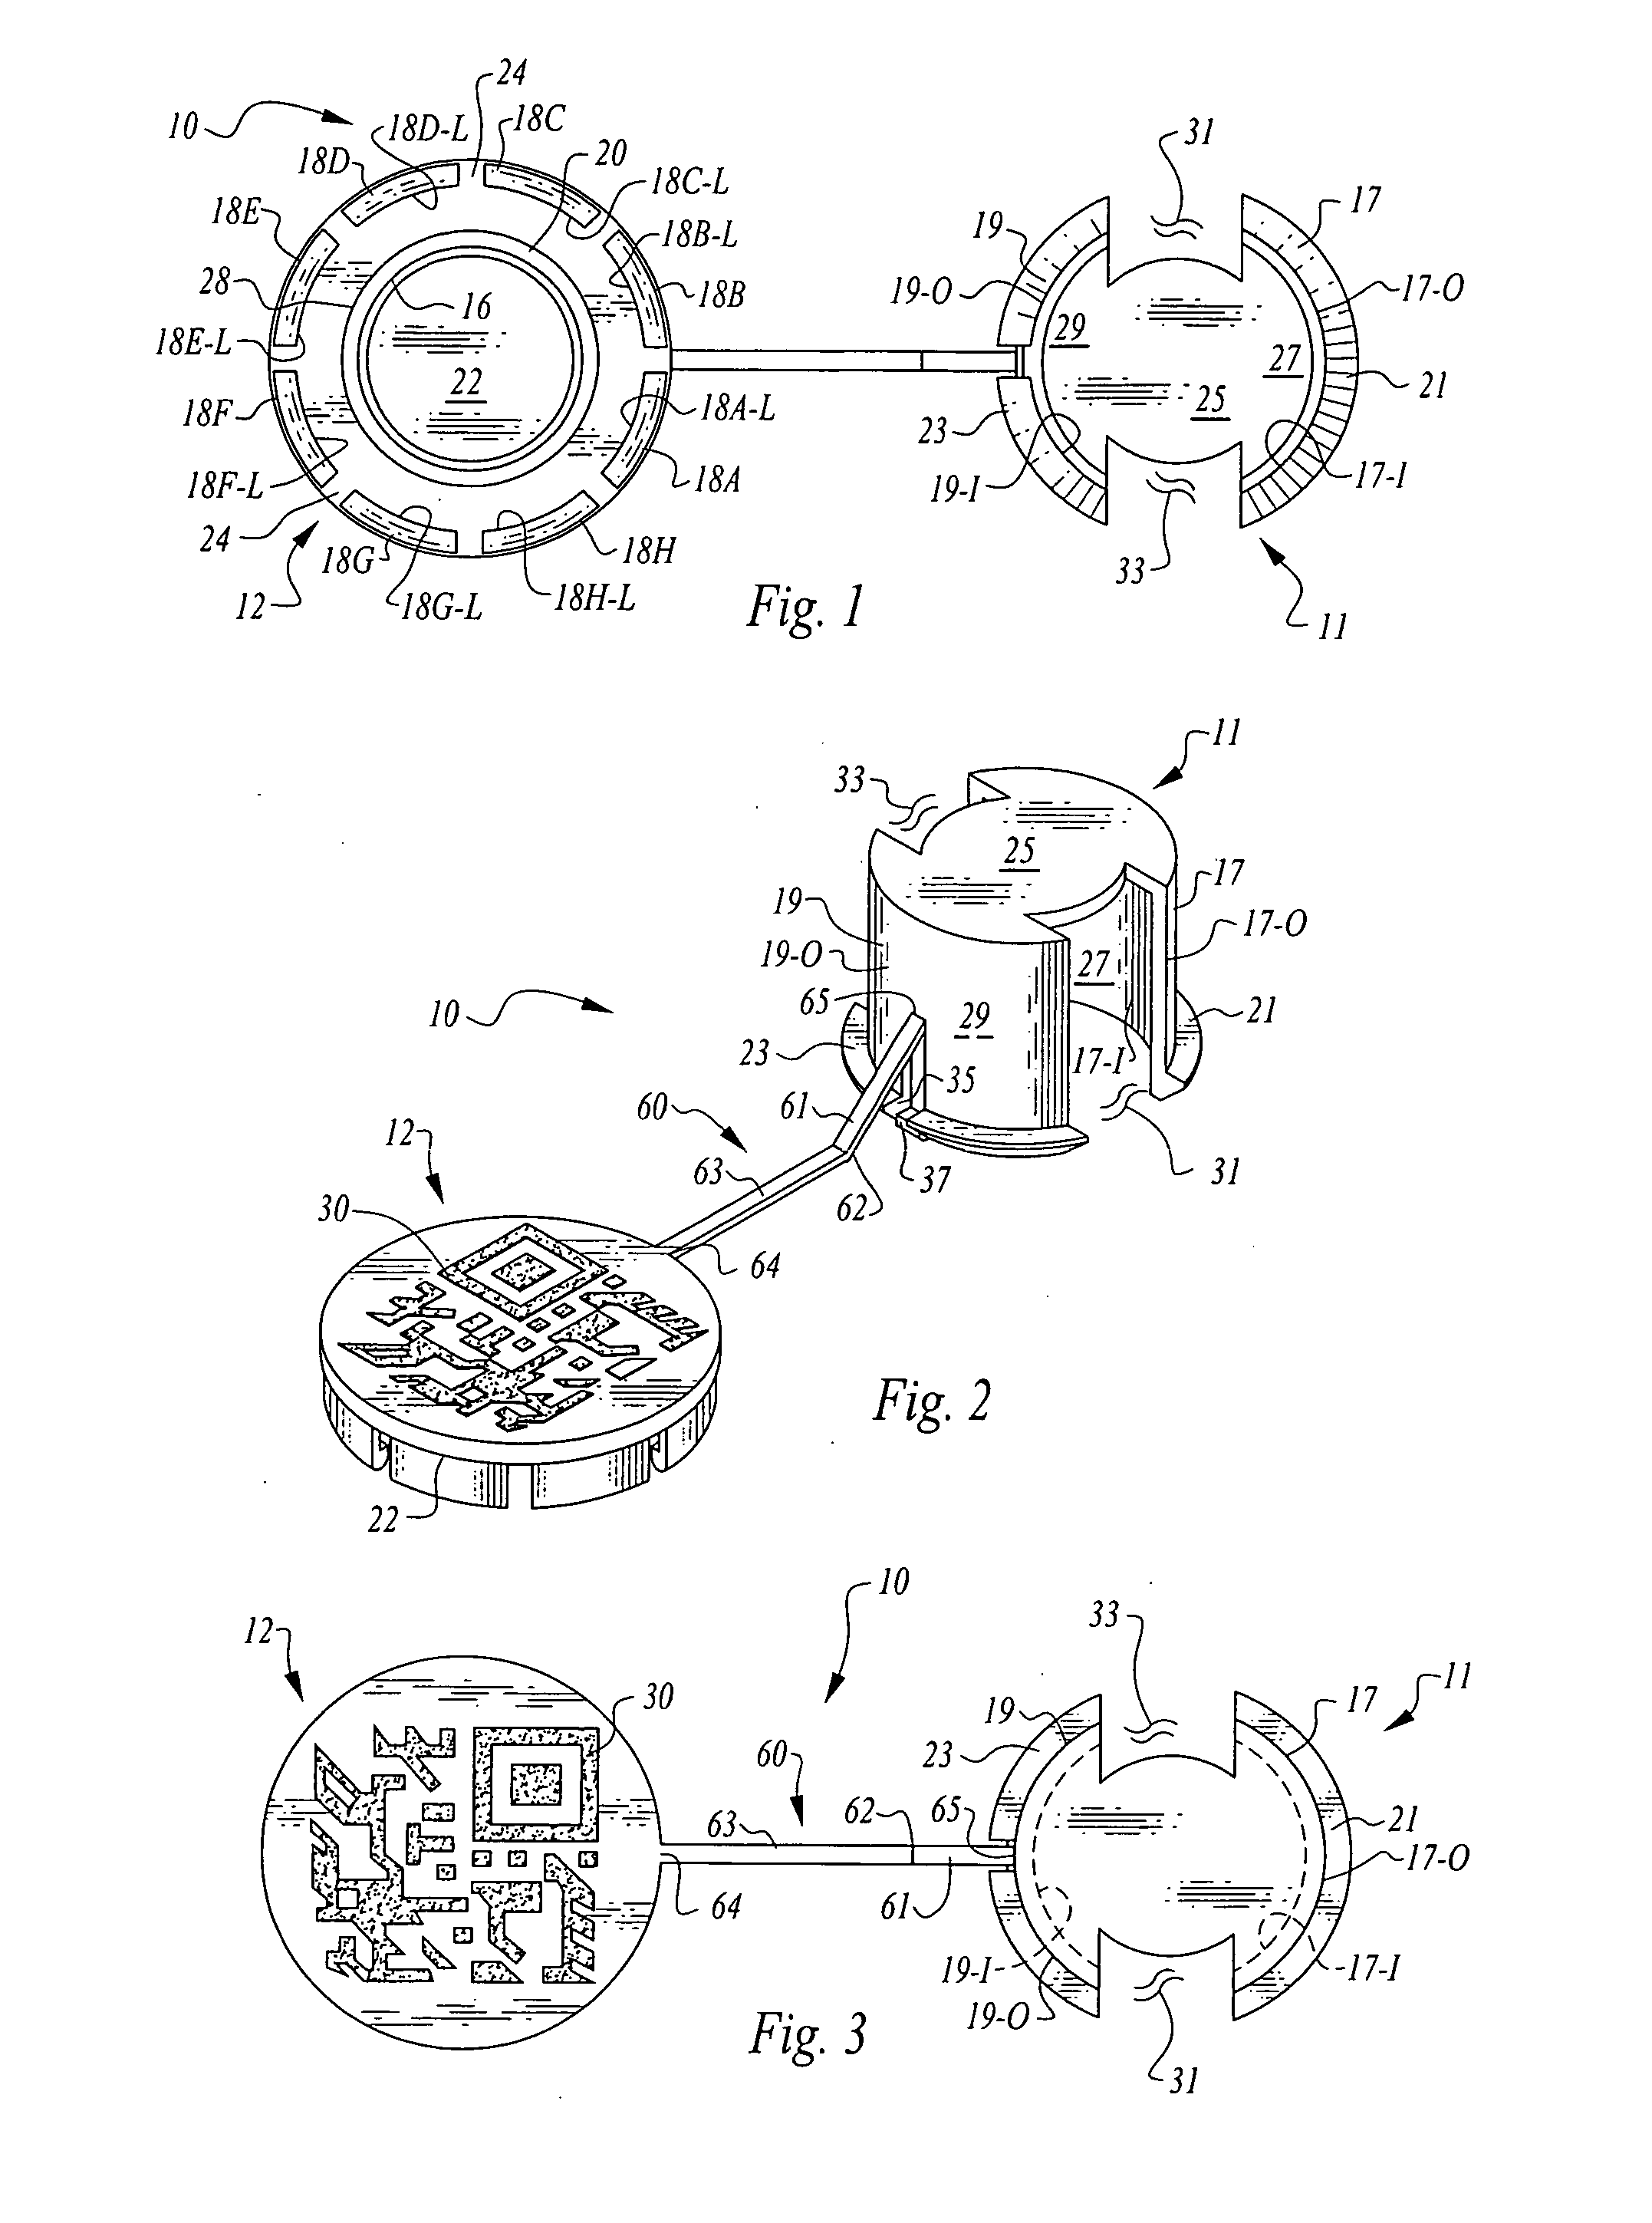 Coded information bearing identification tags for cables